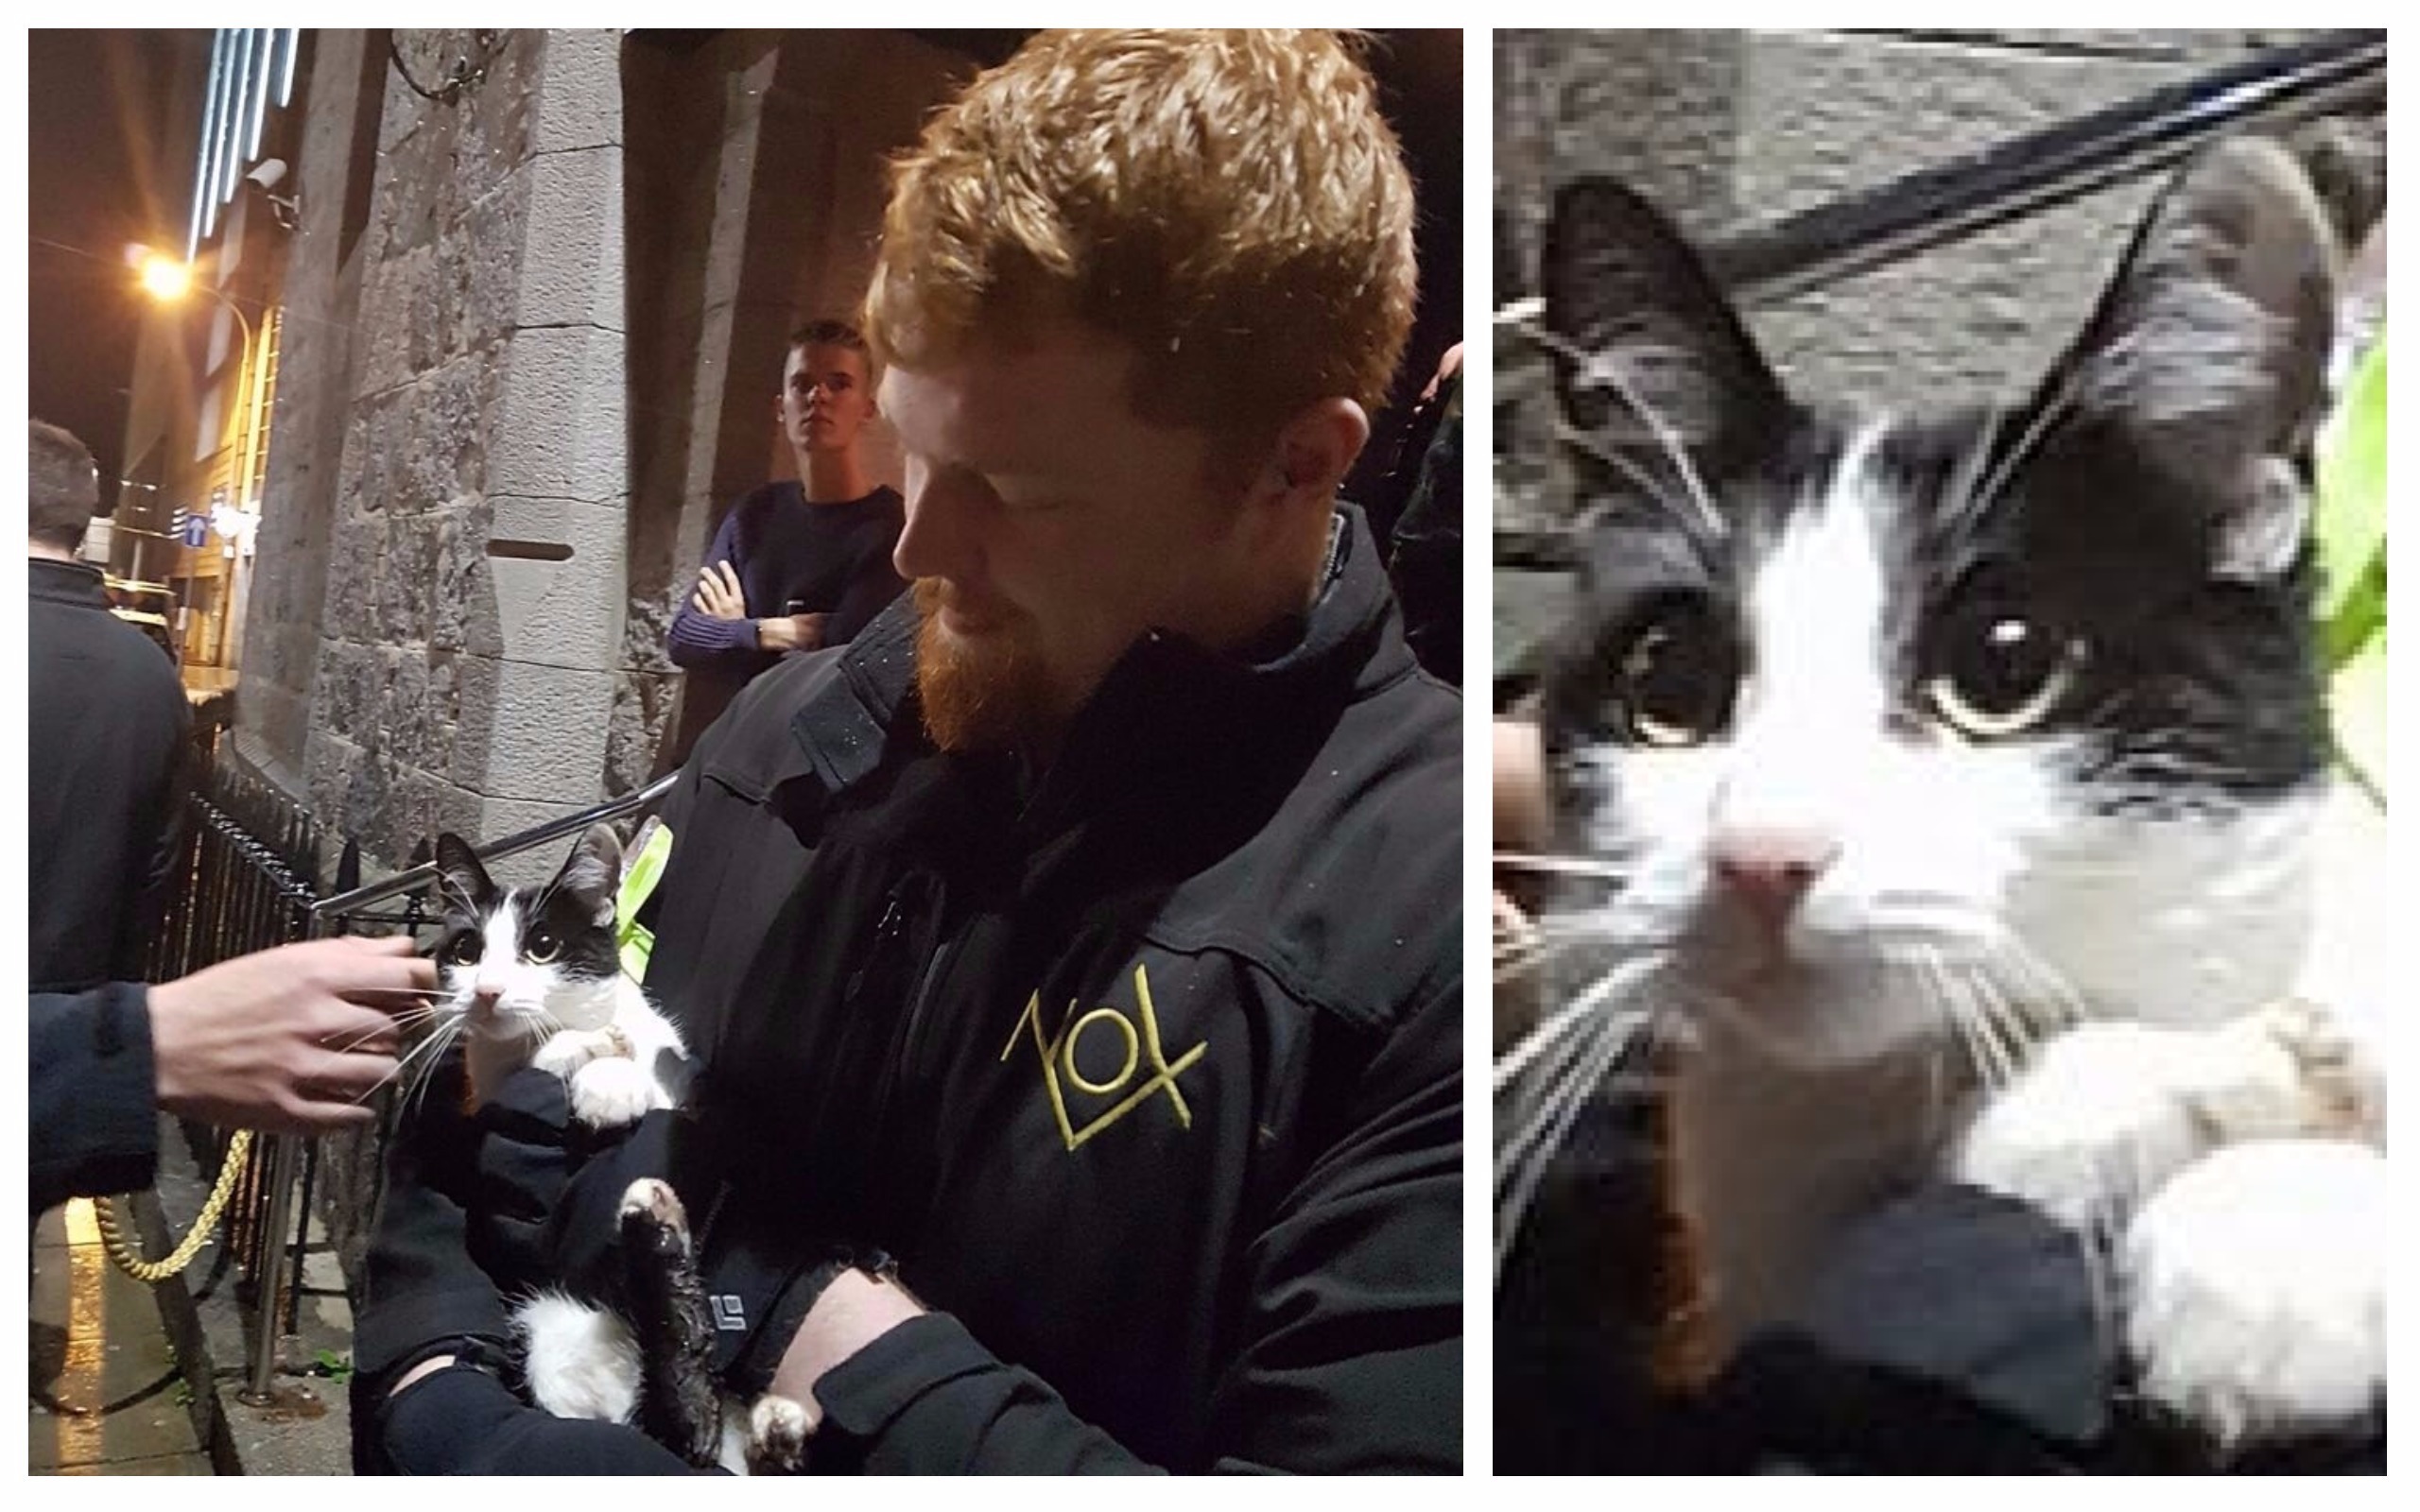 Security manager Lewis Thomson found the kitty trying to sneak into his nightclub